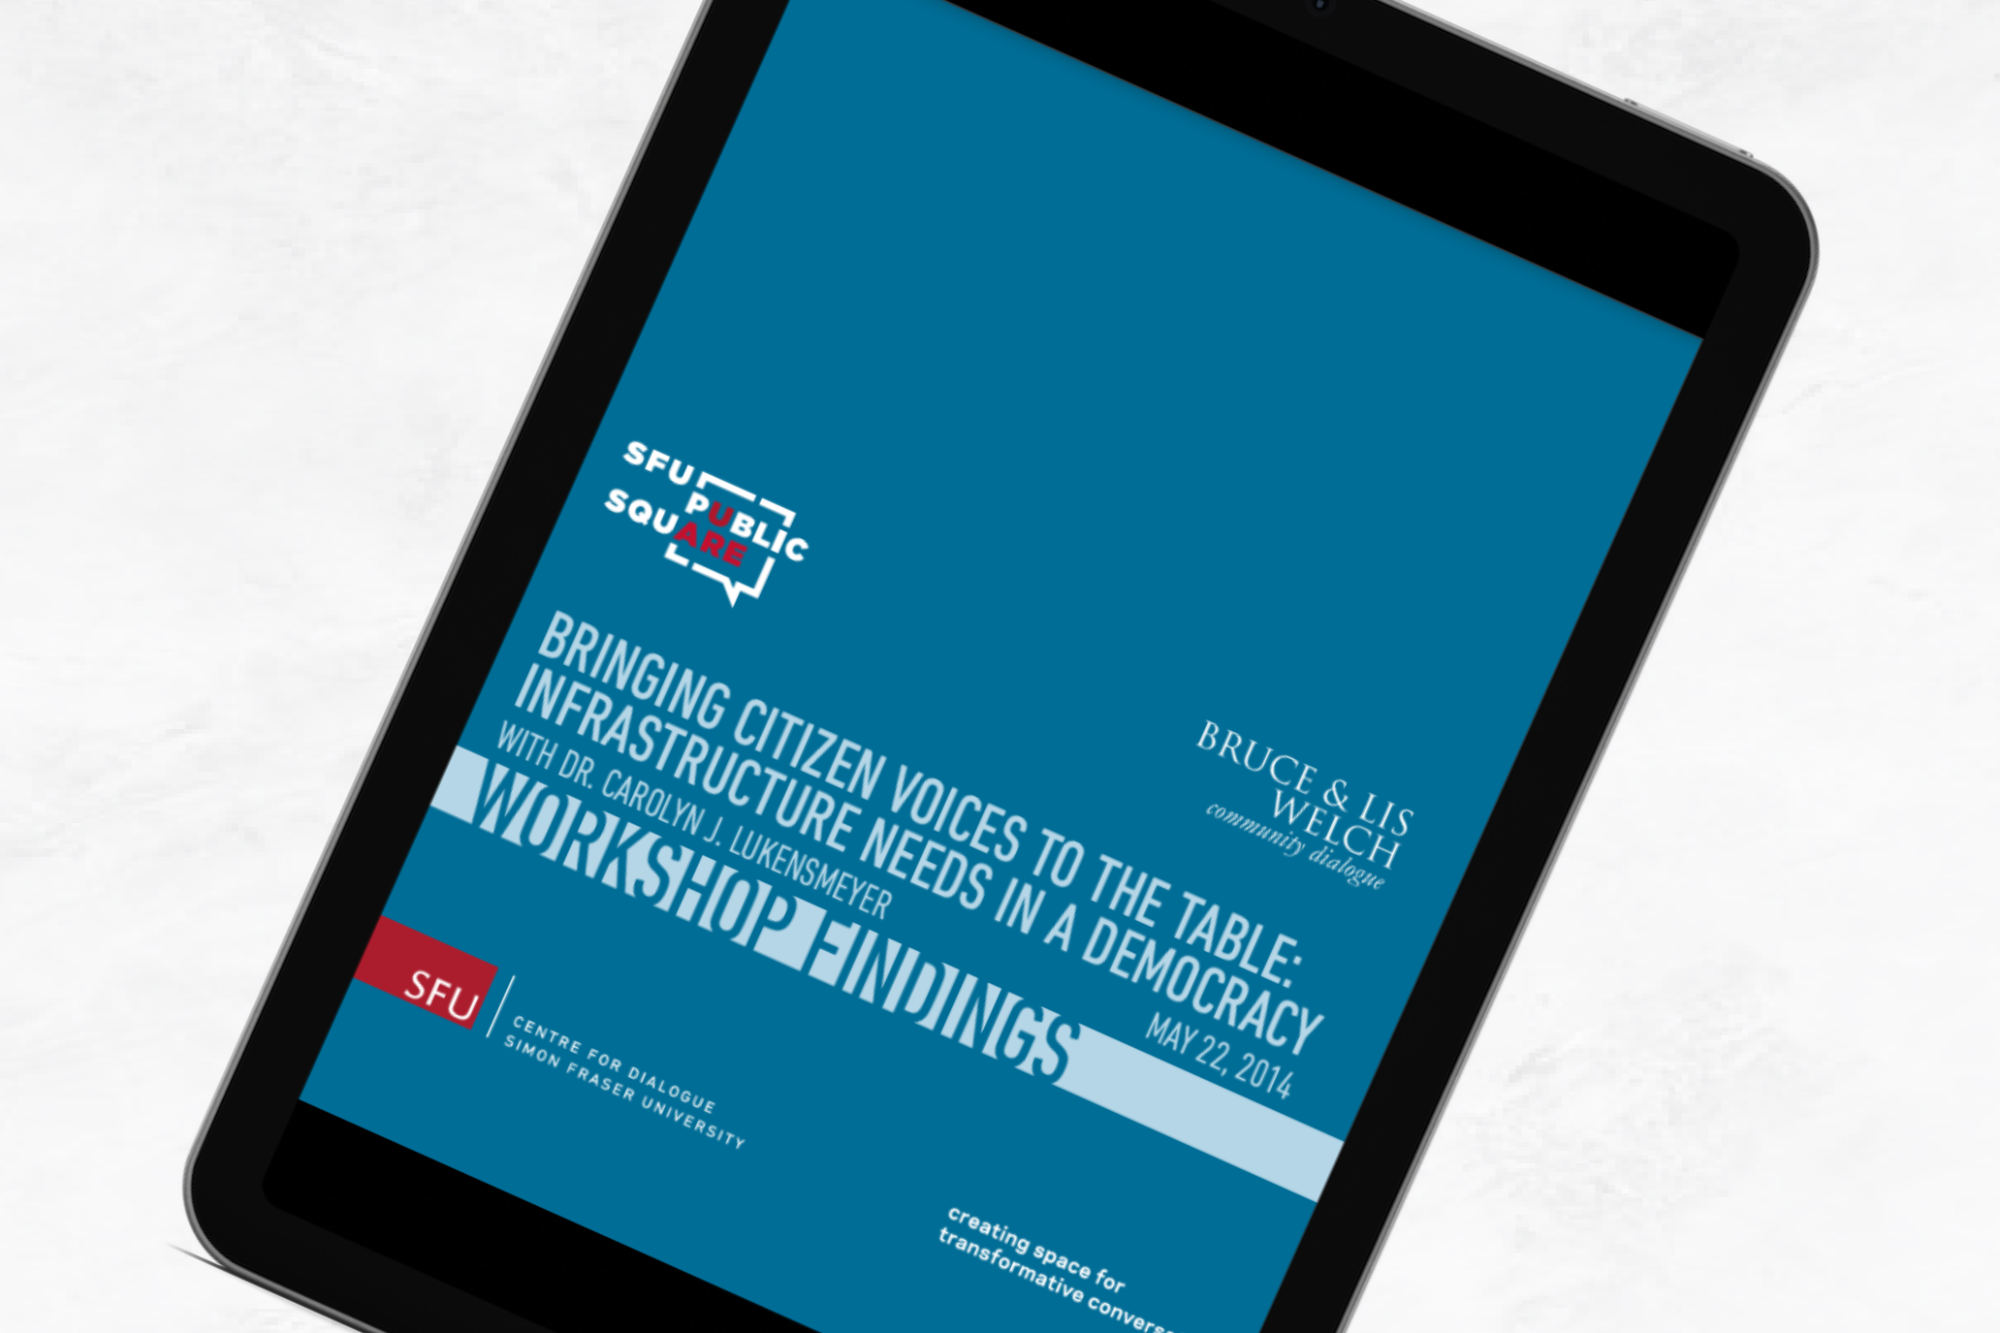 Mockup of the "Bringing Citizens Voices to the Table" report cover on a tablet screen